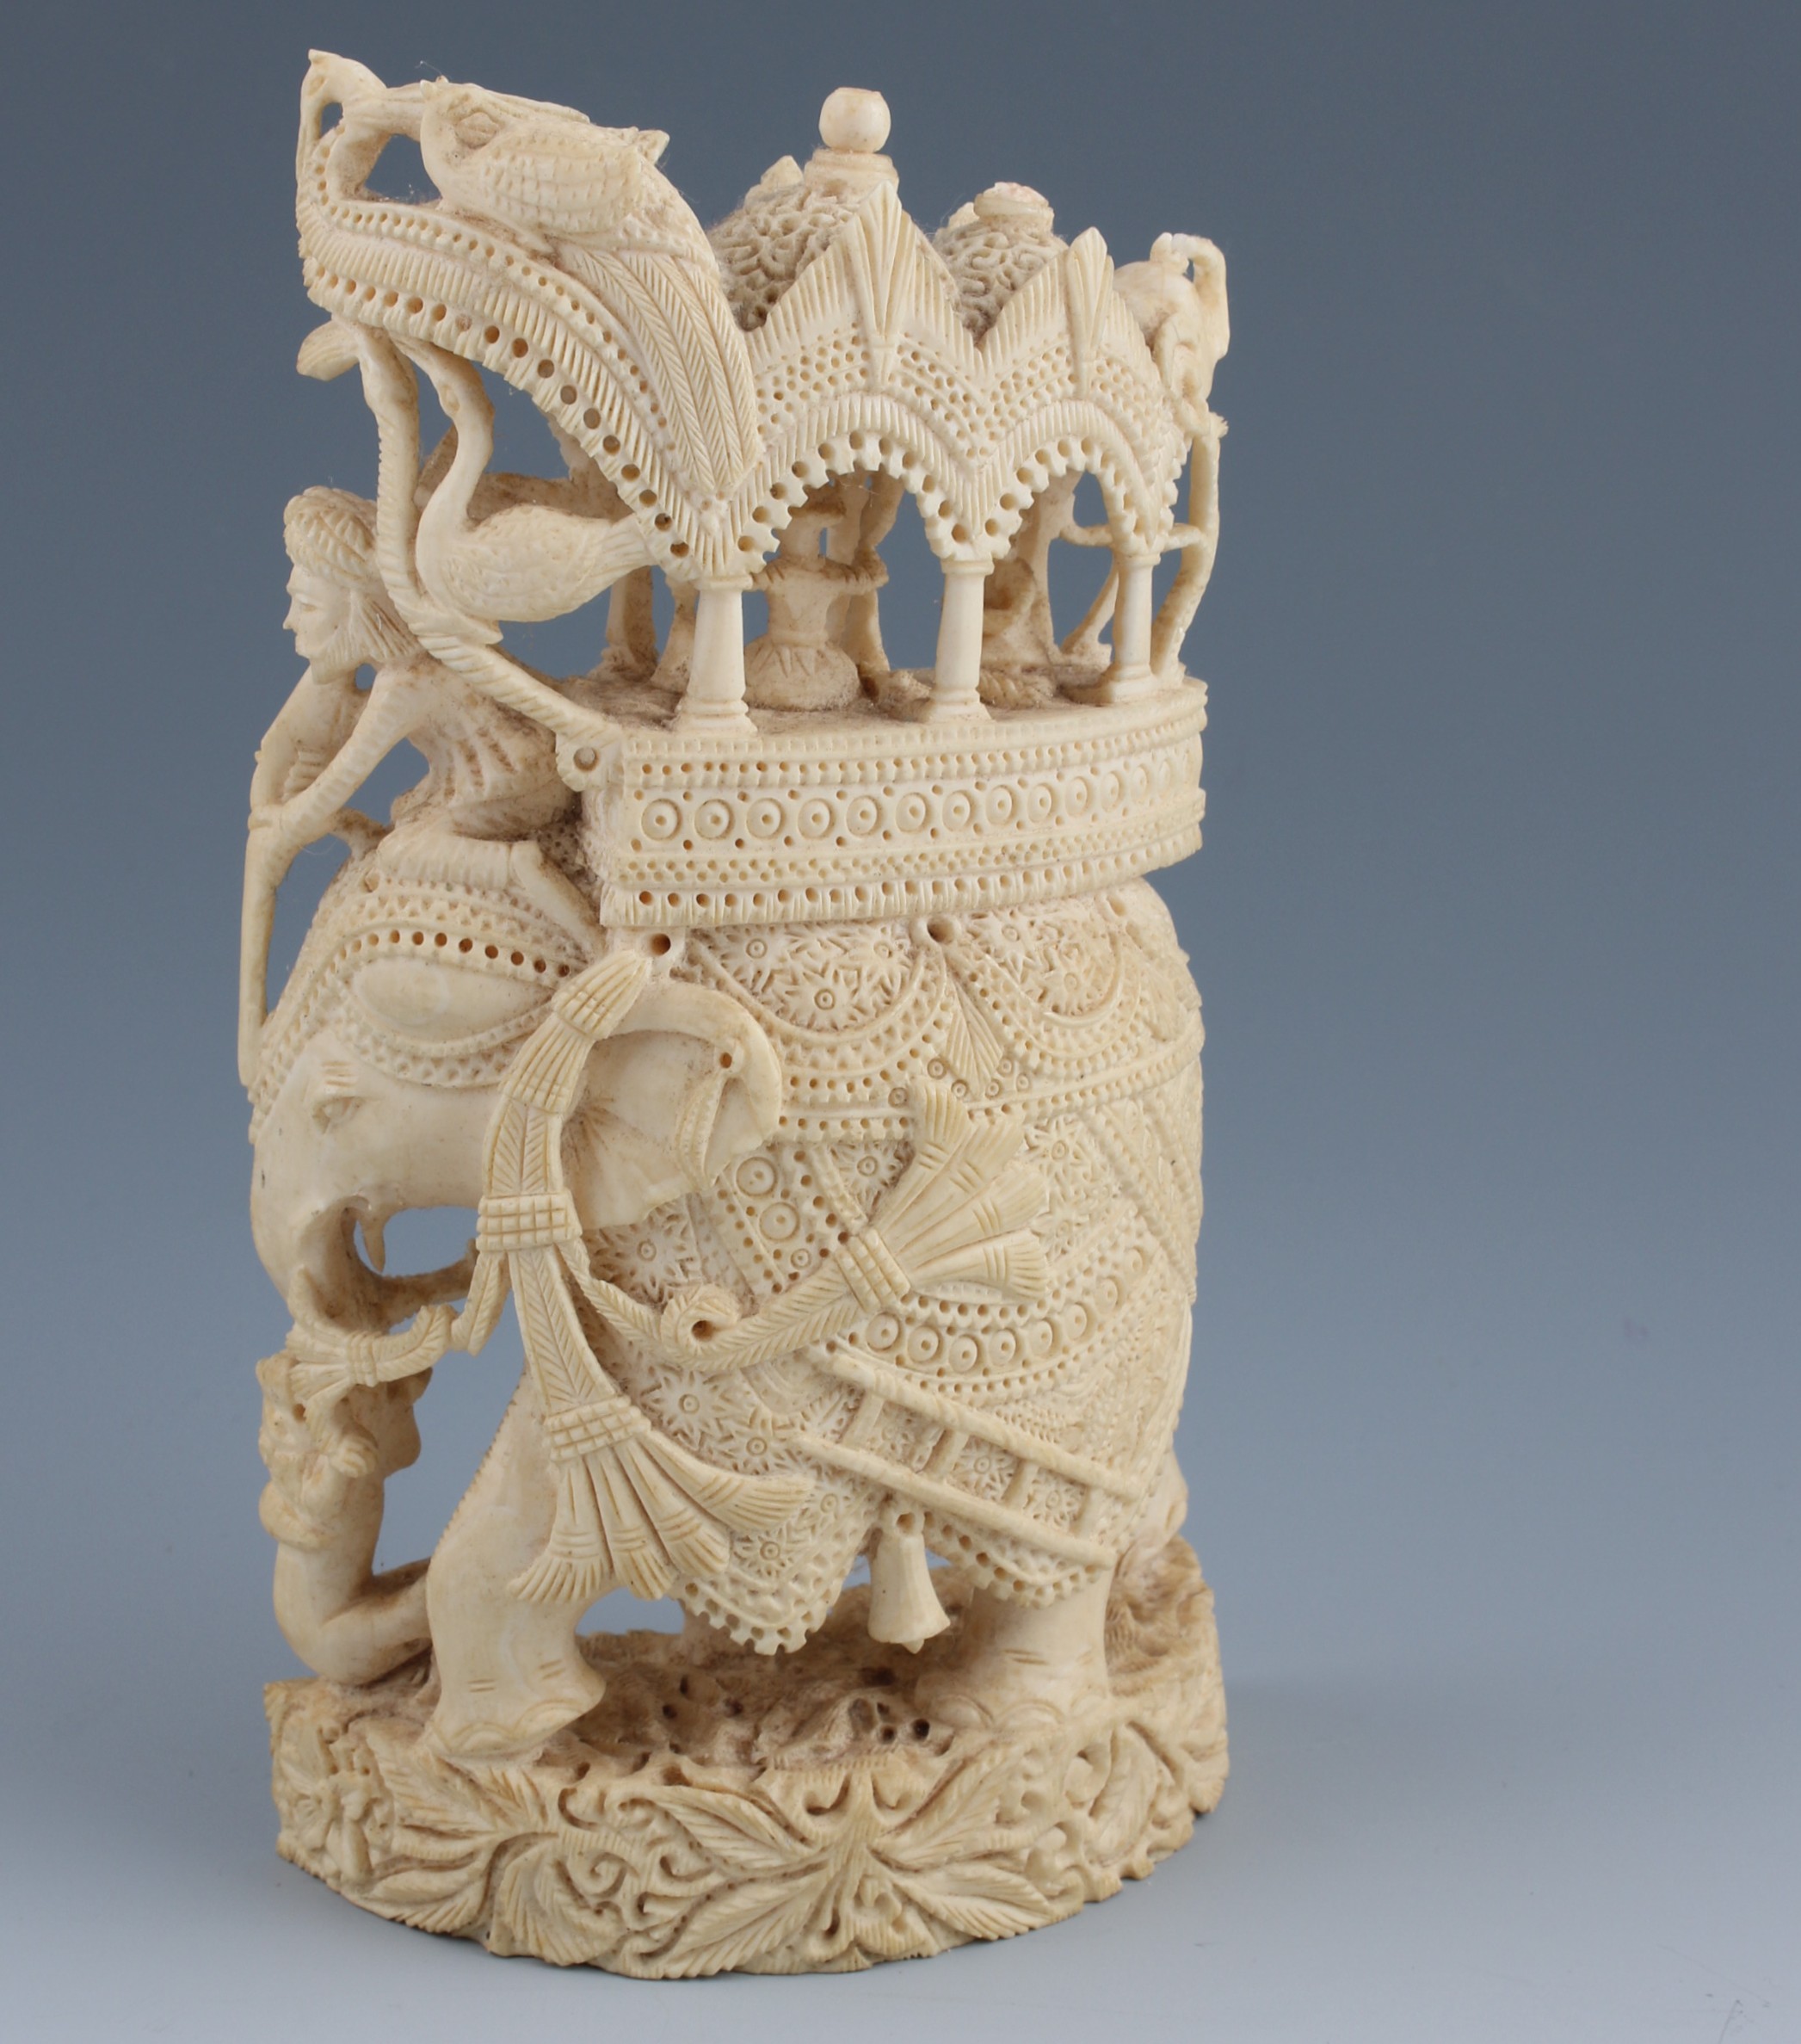 An early 20th Century Indian ivory carved and pierced group, the whole carved as an elephant and